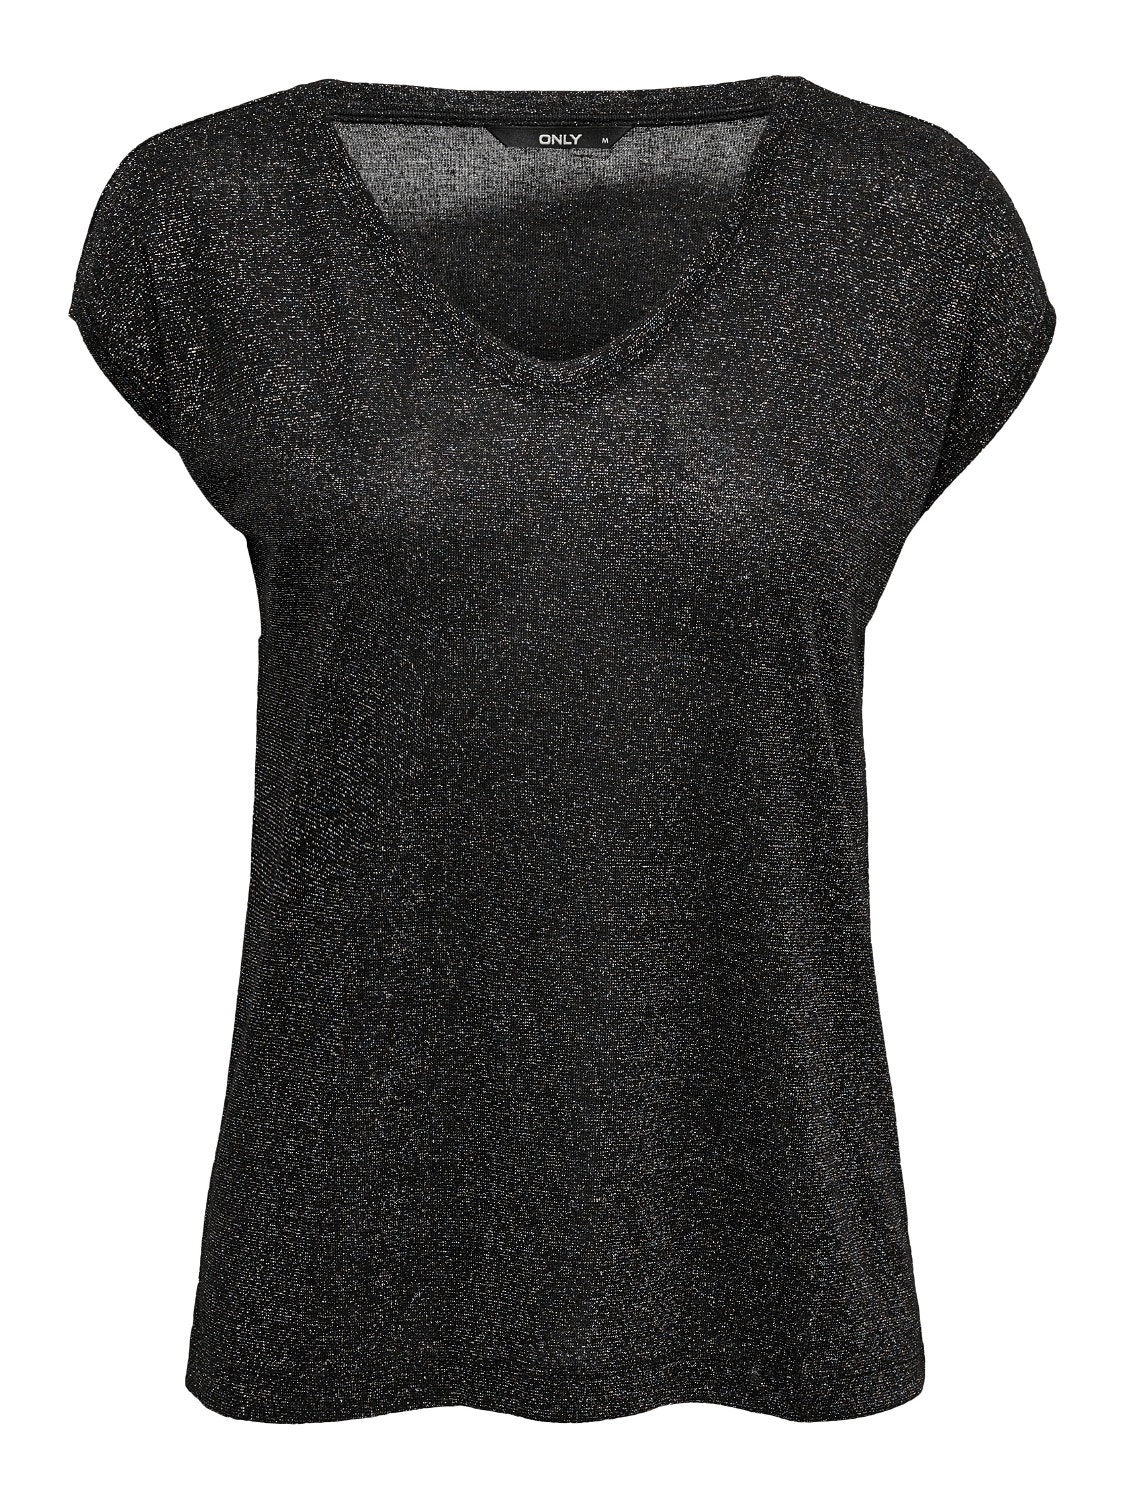 ONLY Loose Fit Round Neck Top -Black - 15136069